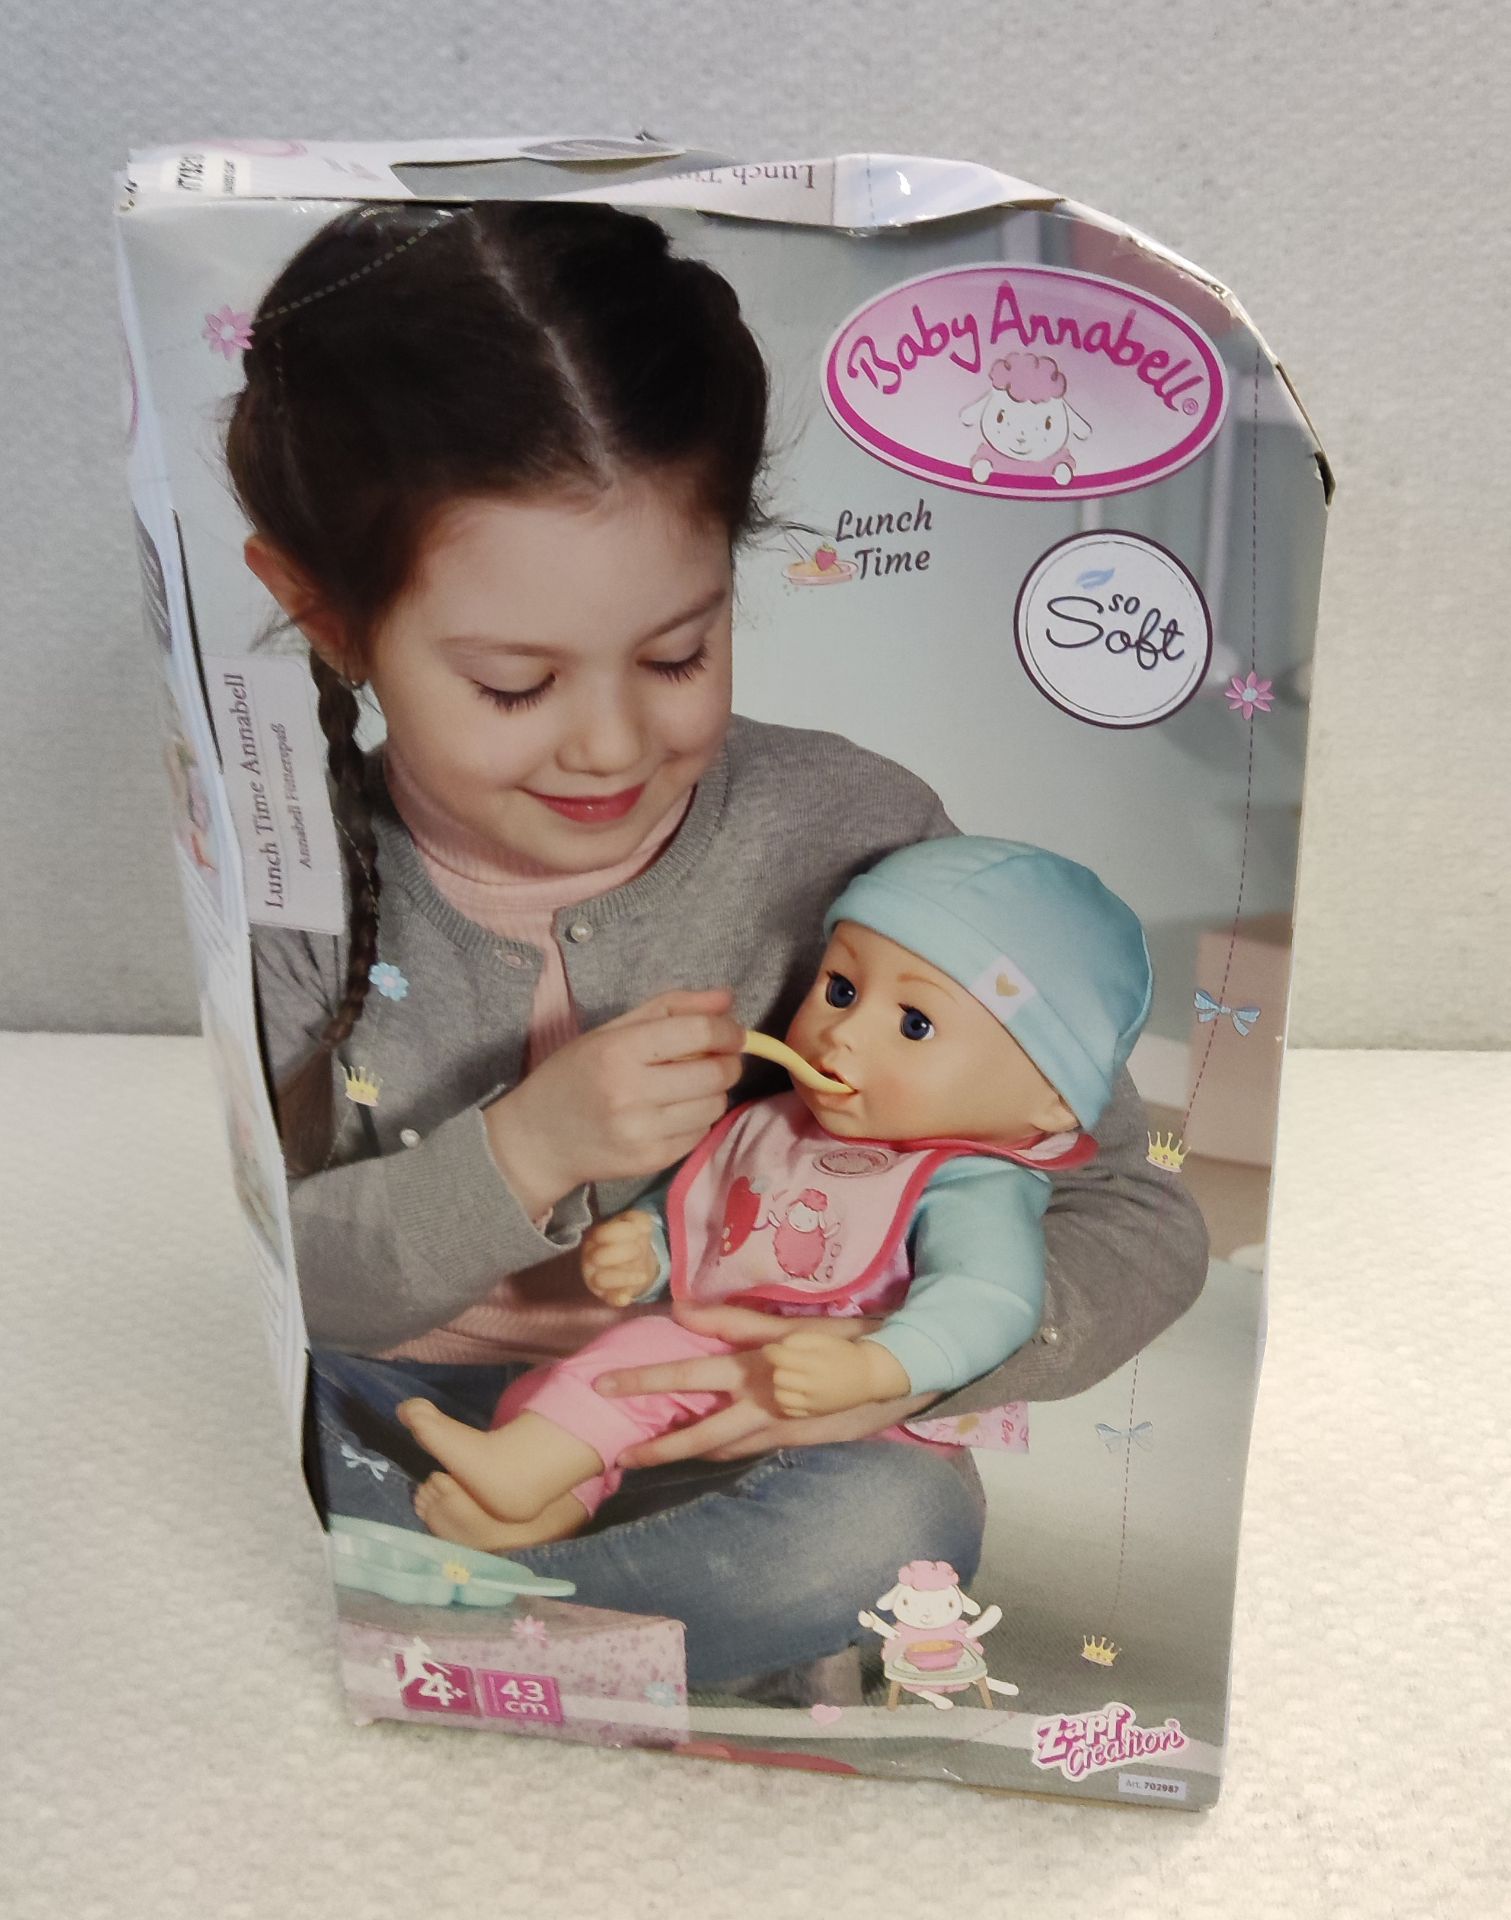 1 x Baby Annabell Lunch Time Annabell Set - New/Boxed - Image 6 of 9